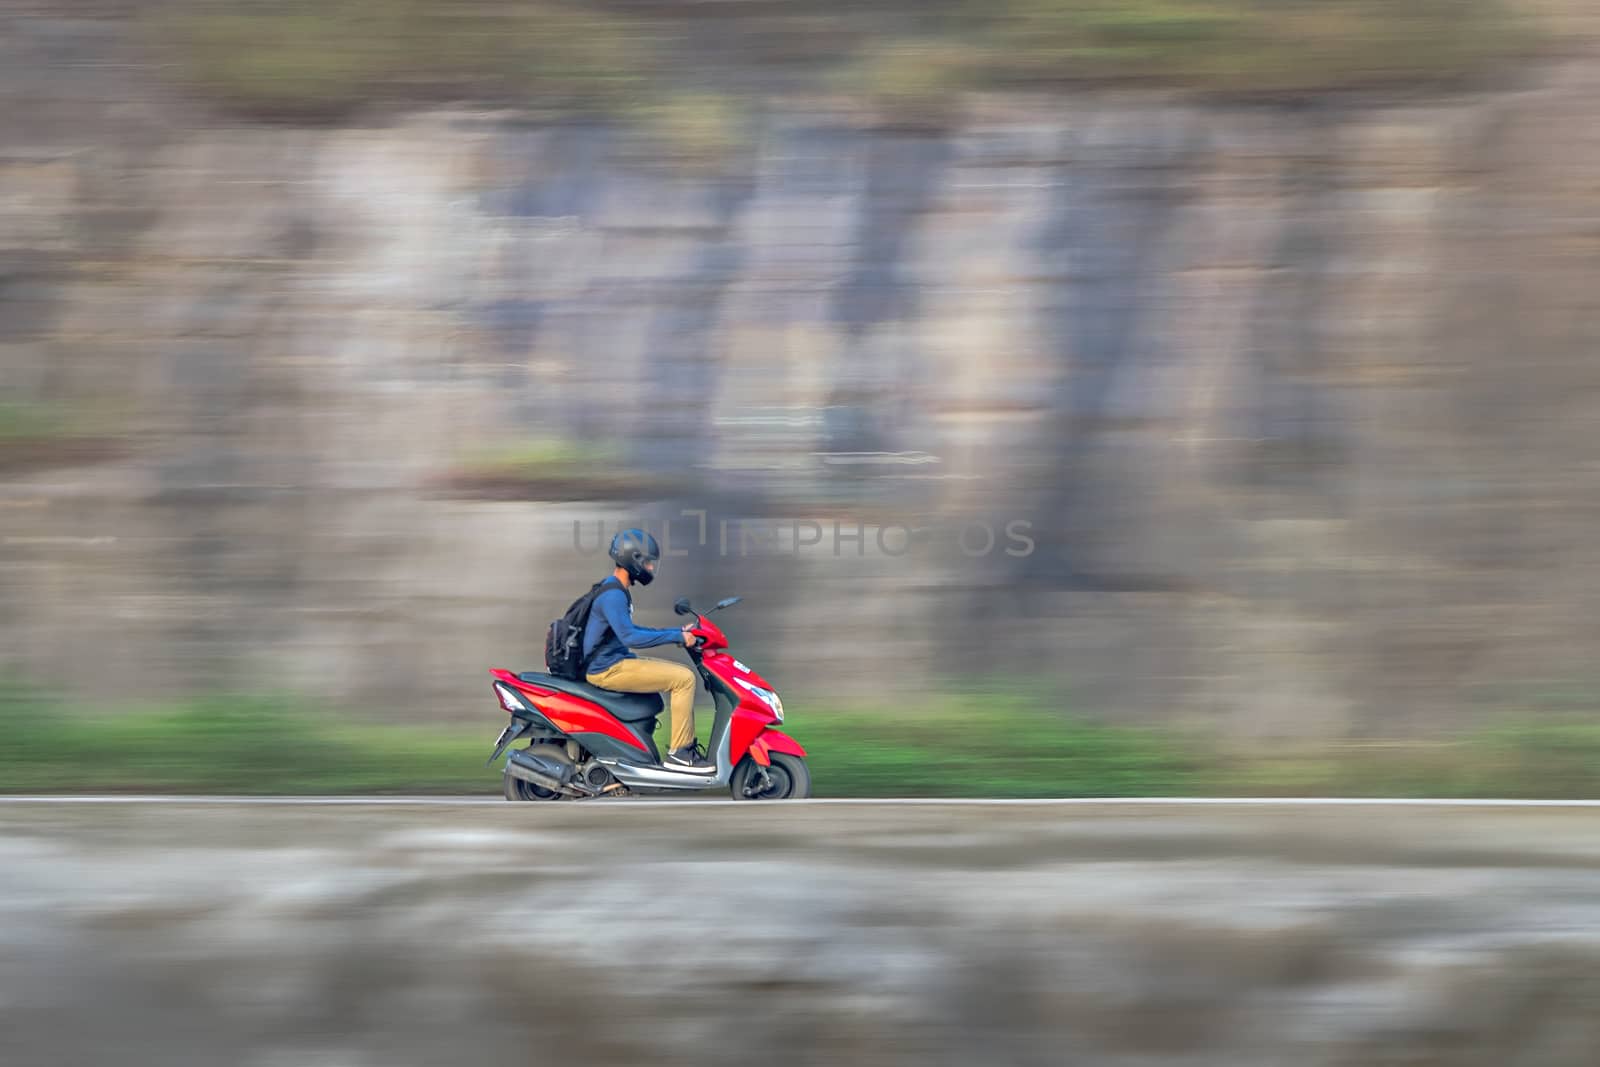 Motion blur image of a rider wearing helmet for safety, riding uphill on a red two wheeler moped.